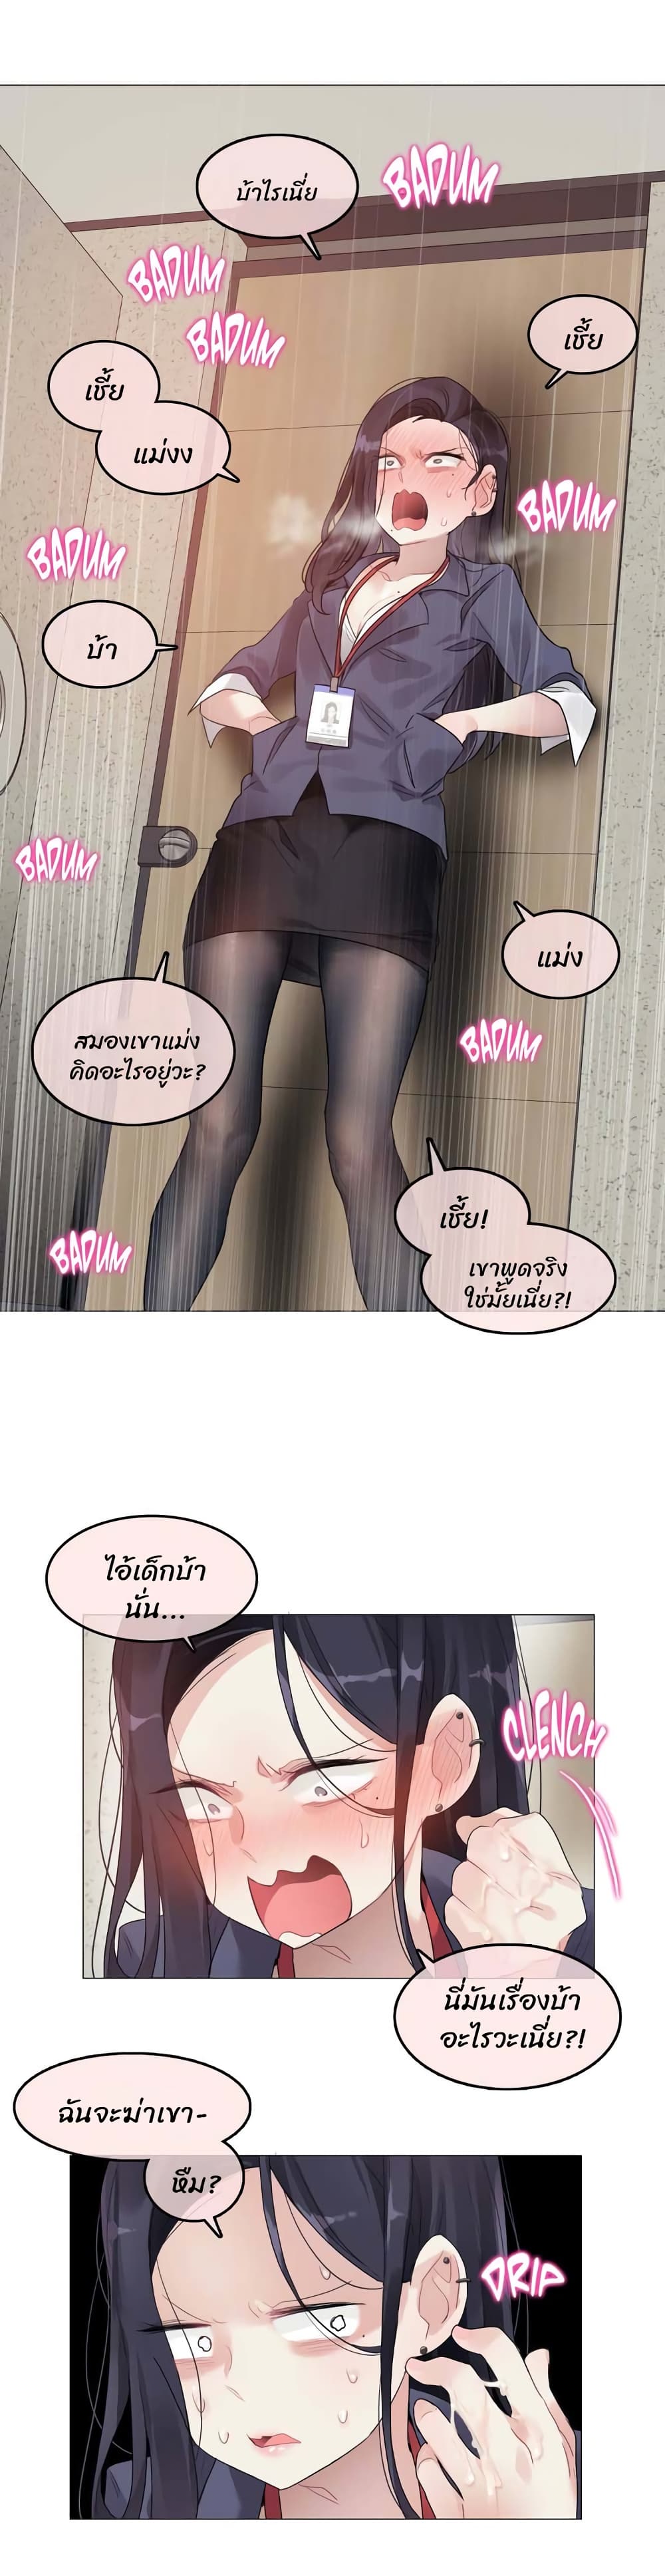 A Pervert's Daily Life 95 (7)